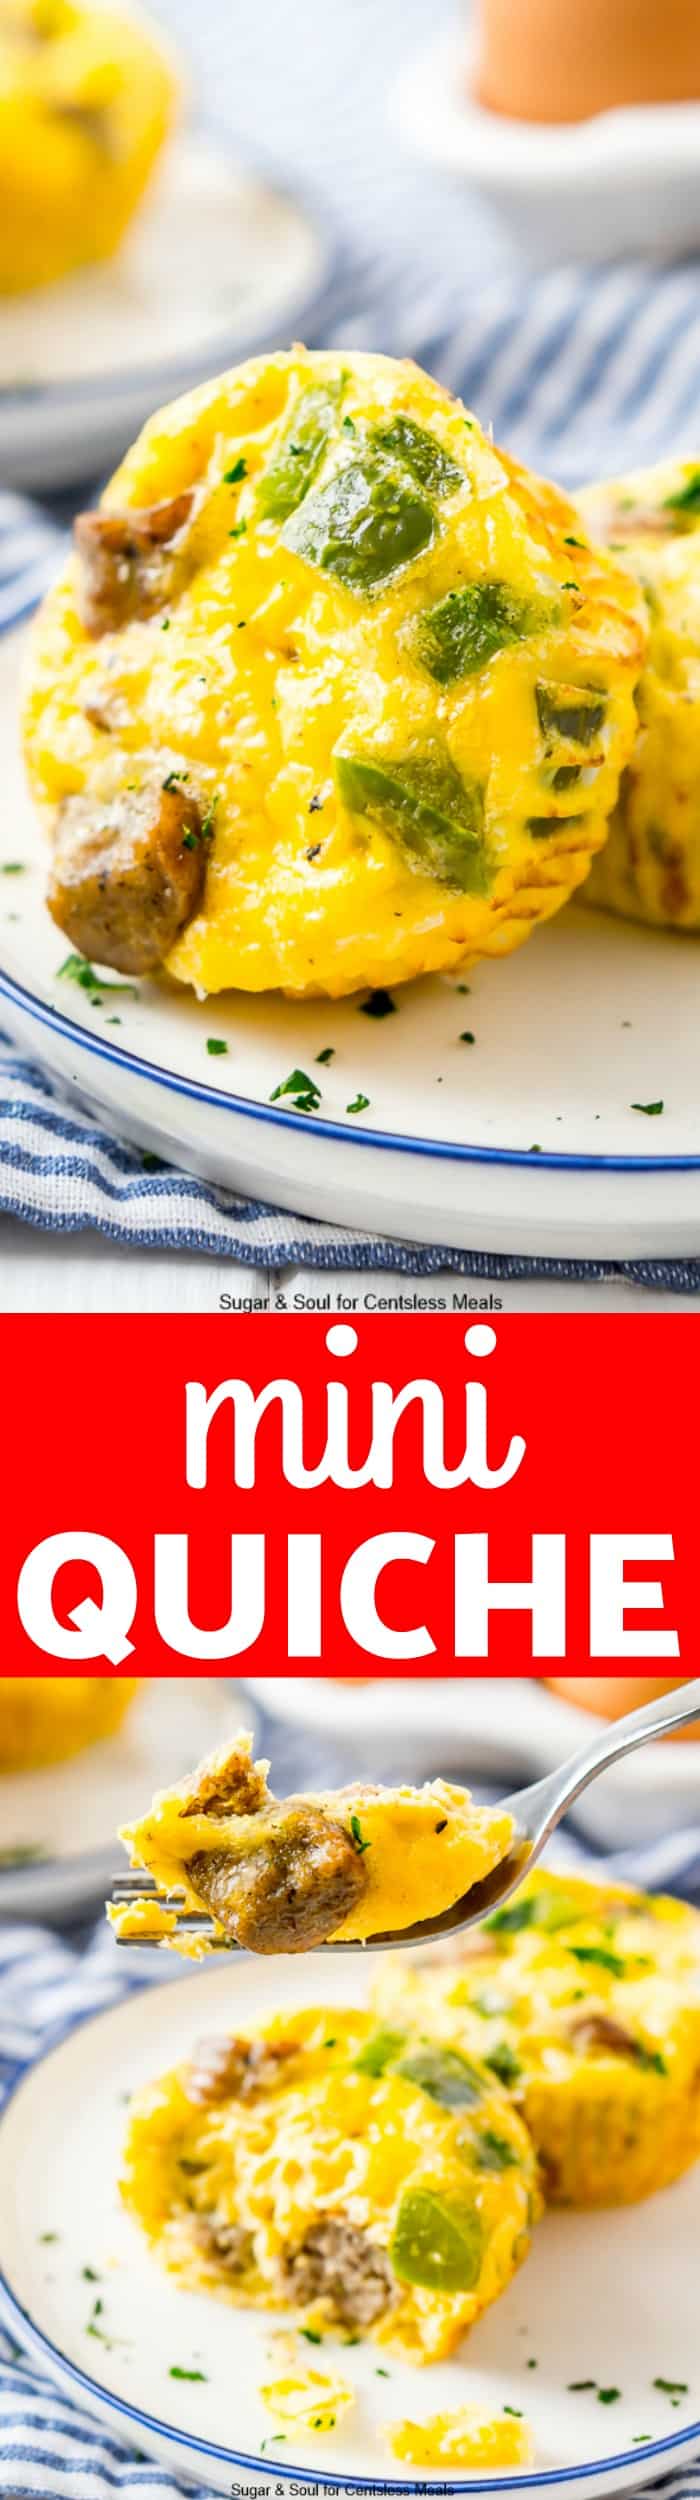 Mini quiche on a plate with a bite on a fork and a title